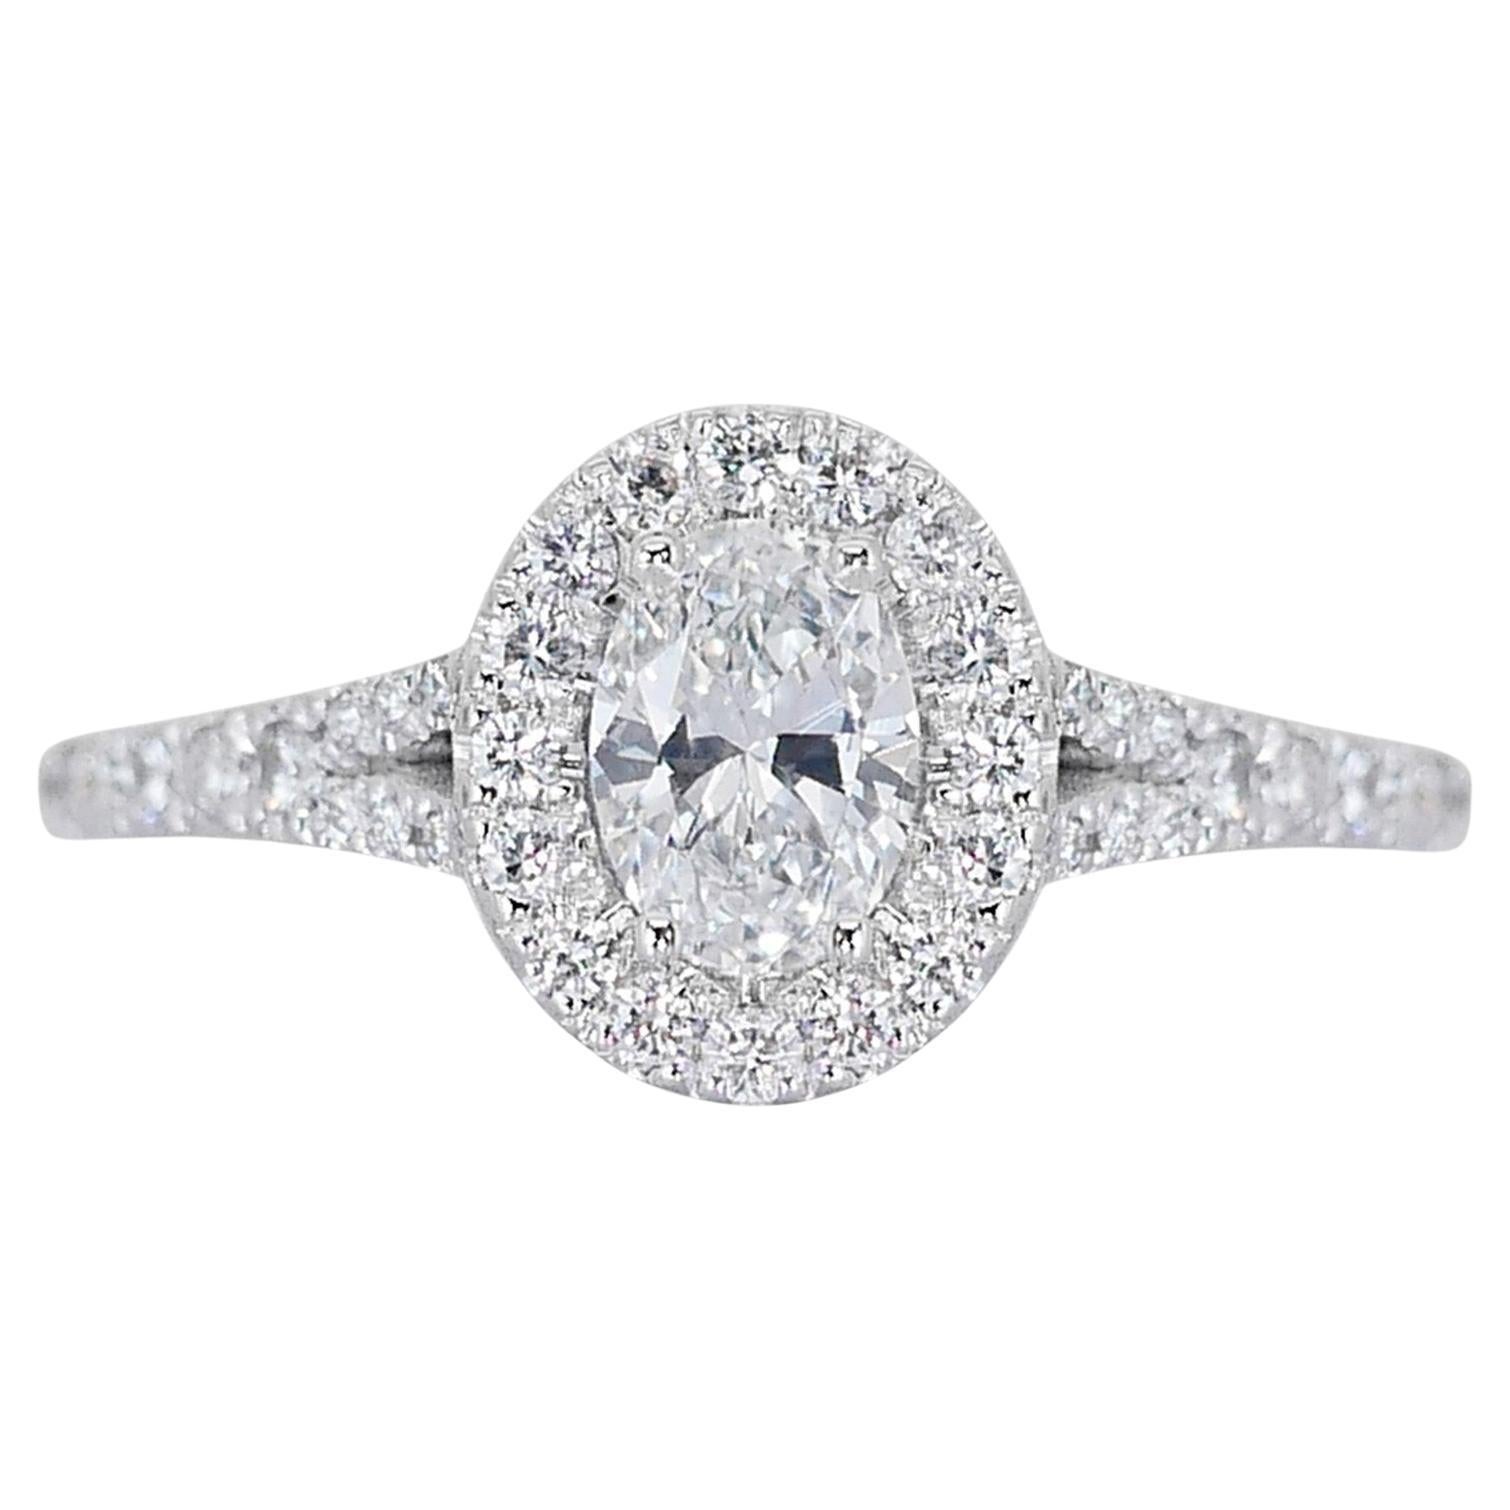 Lustrous 1.41ct Double Excellent Ideal Cut Diamonds Halo Ring in 18k White Gold 